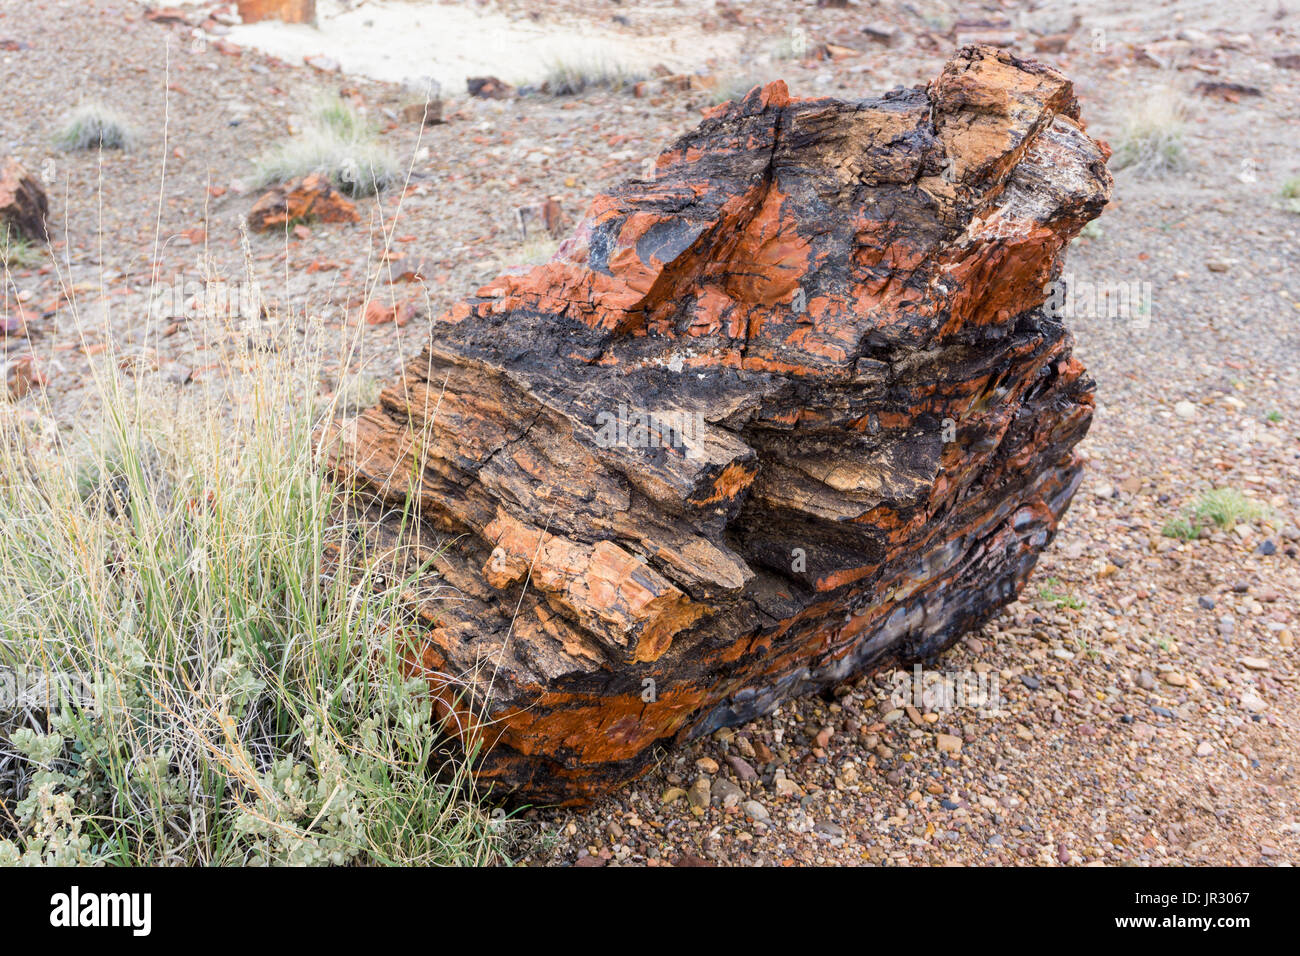 A piece of fossilized tree from the Jurassic time period at Petrified Forest National Park. Stock Photo